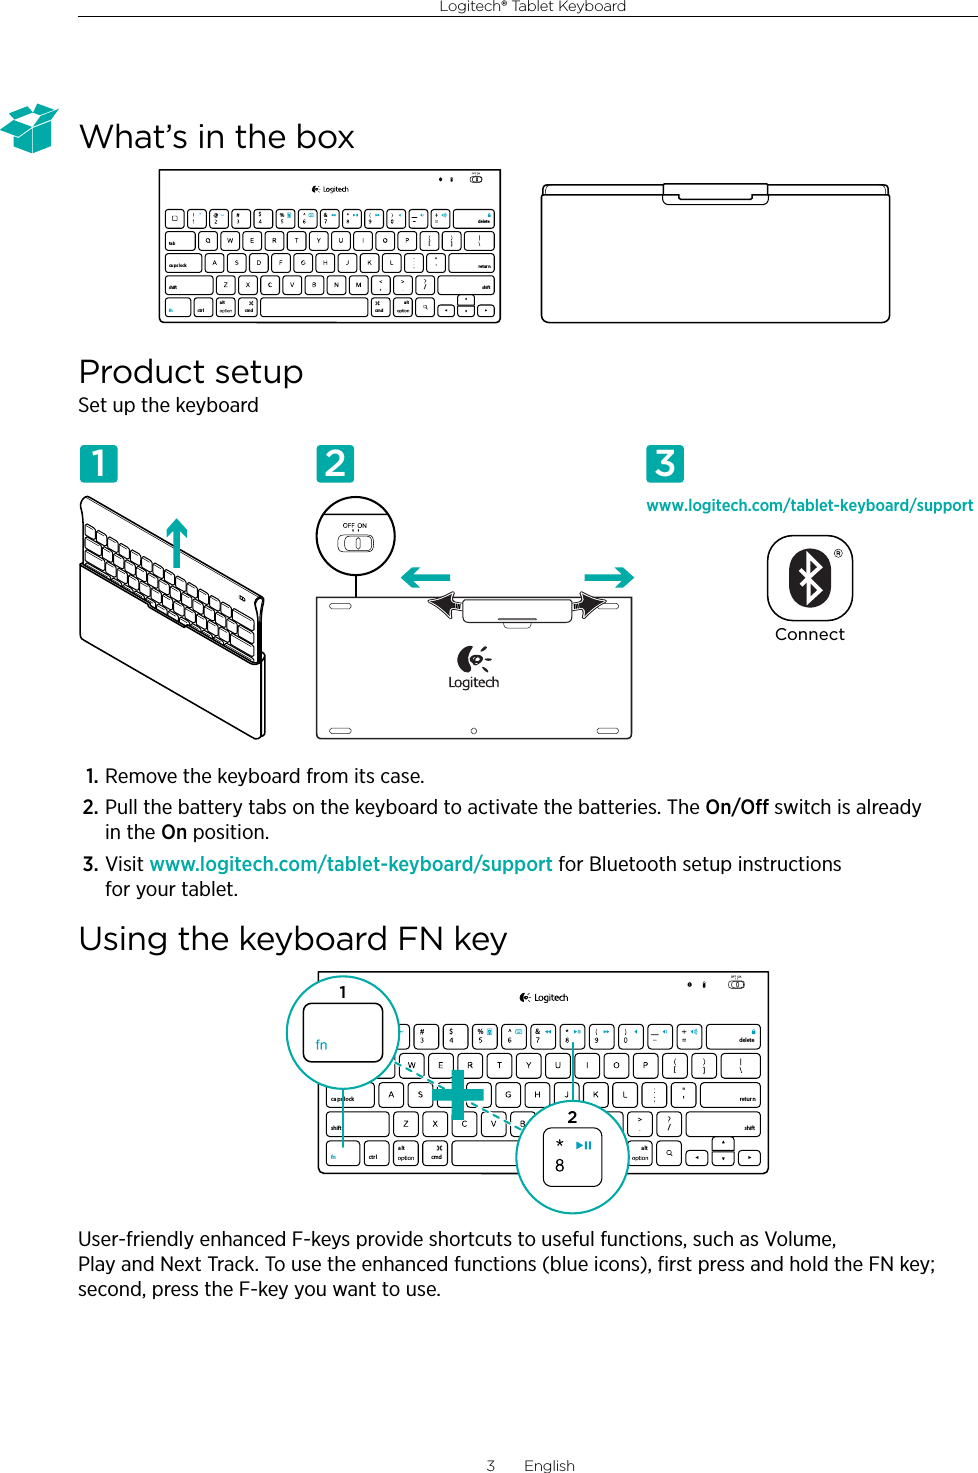 Logitech® Tablet Keyboard3  EnglishWhat’s in the boxProduct setupSet up the keyboard1. Remove the keyboard from its case.2. Pull the battery tabs on the keyboard to activate the batteries. The On/O switch is already in the On position.3. Visit www.logitech.com/tablet-keyboard/support for Bluetooth setup instructions for your tablet.Using the keyboard FN keyUser-friendly enhanced F-keys provide shortcuts to useful functions, such as Volume, Play and Next Track. To use the enhanced functions (blue icons), ﬁrst press and hold the FN key; second, press the F-key you want to use.,/[[&amp;ctr lalt a lttabca ps lockshift shift$%retur ndeletecmd cmdfnwww.logitech.com/tablet-keyboard/supportConnect1 2 3,/[[&amp;ctr lalt alttabca ps lockshift shift$%retur ndeletecmd cmdfn12